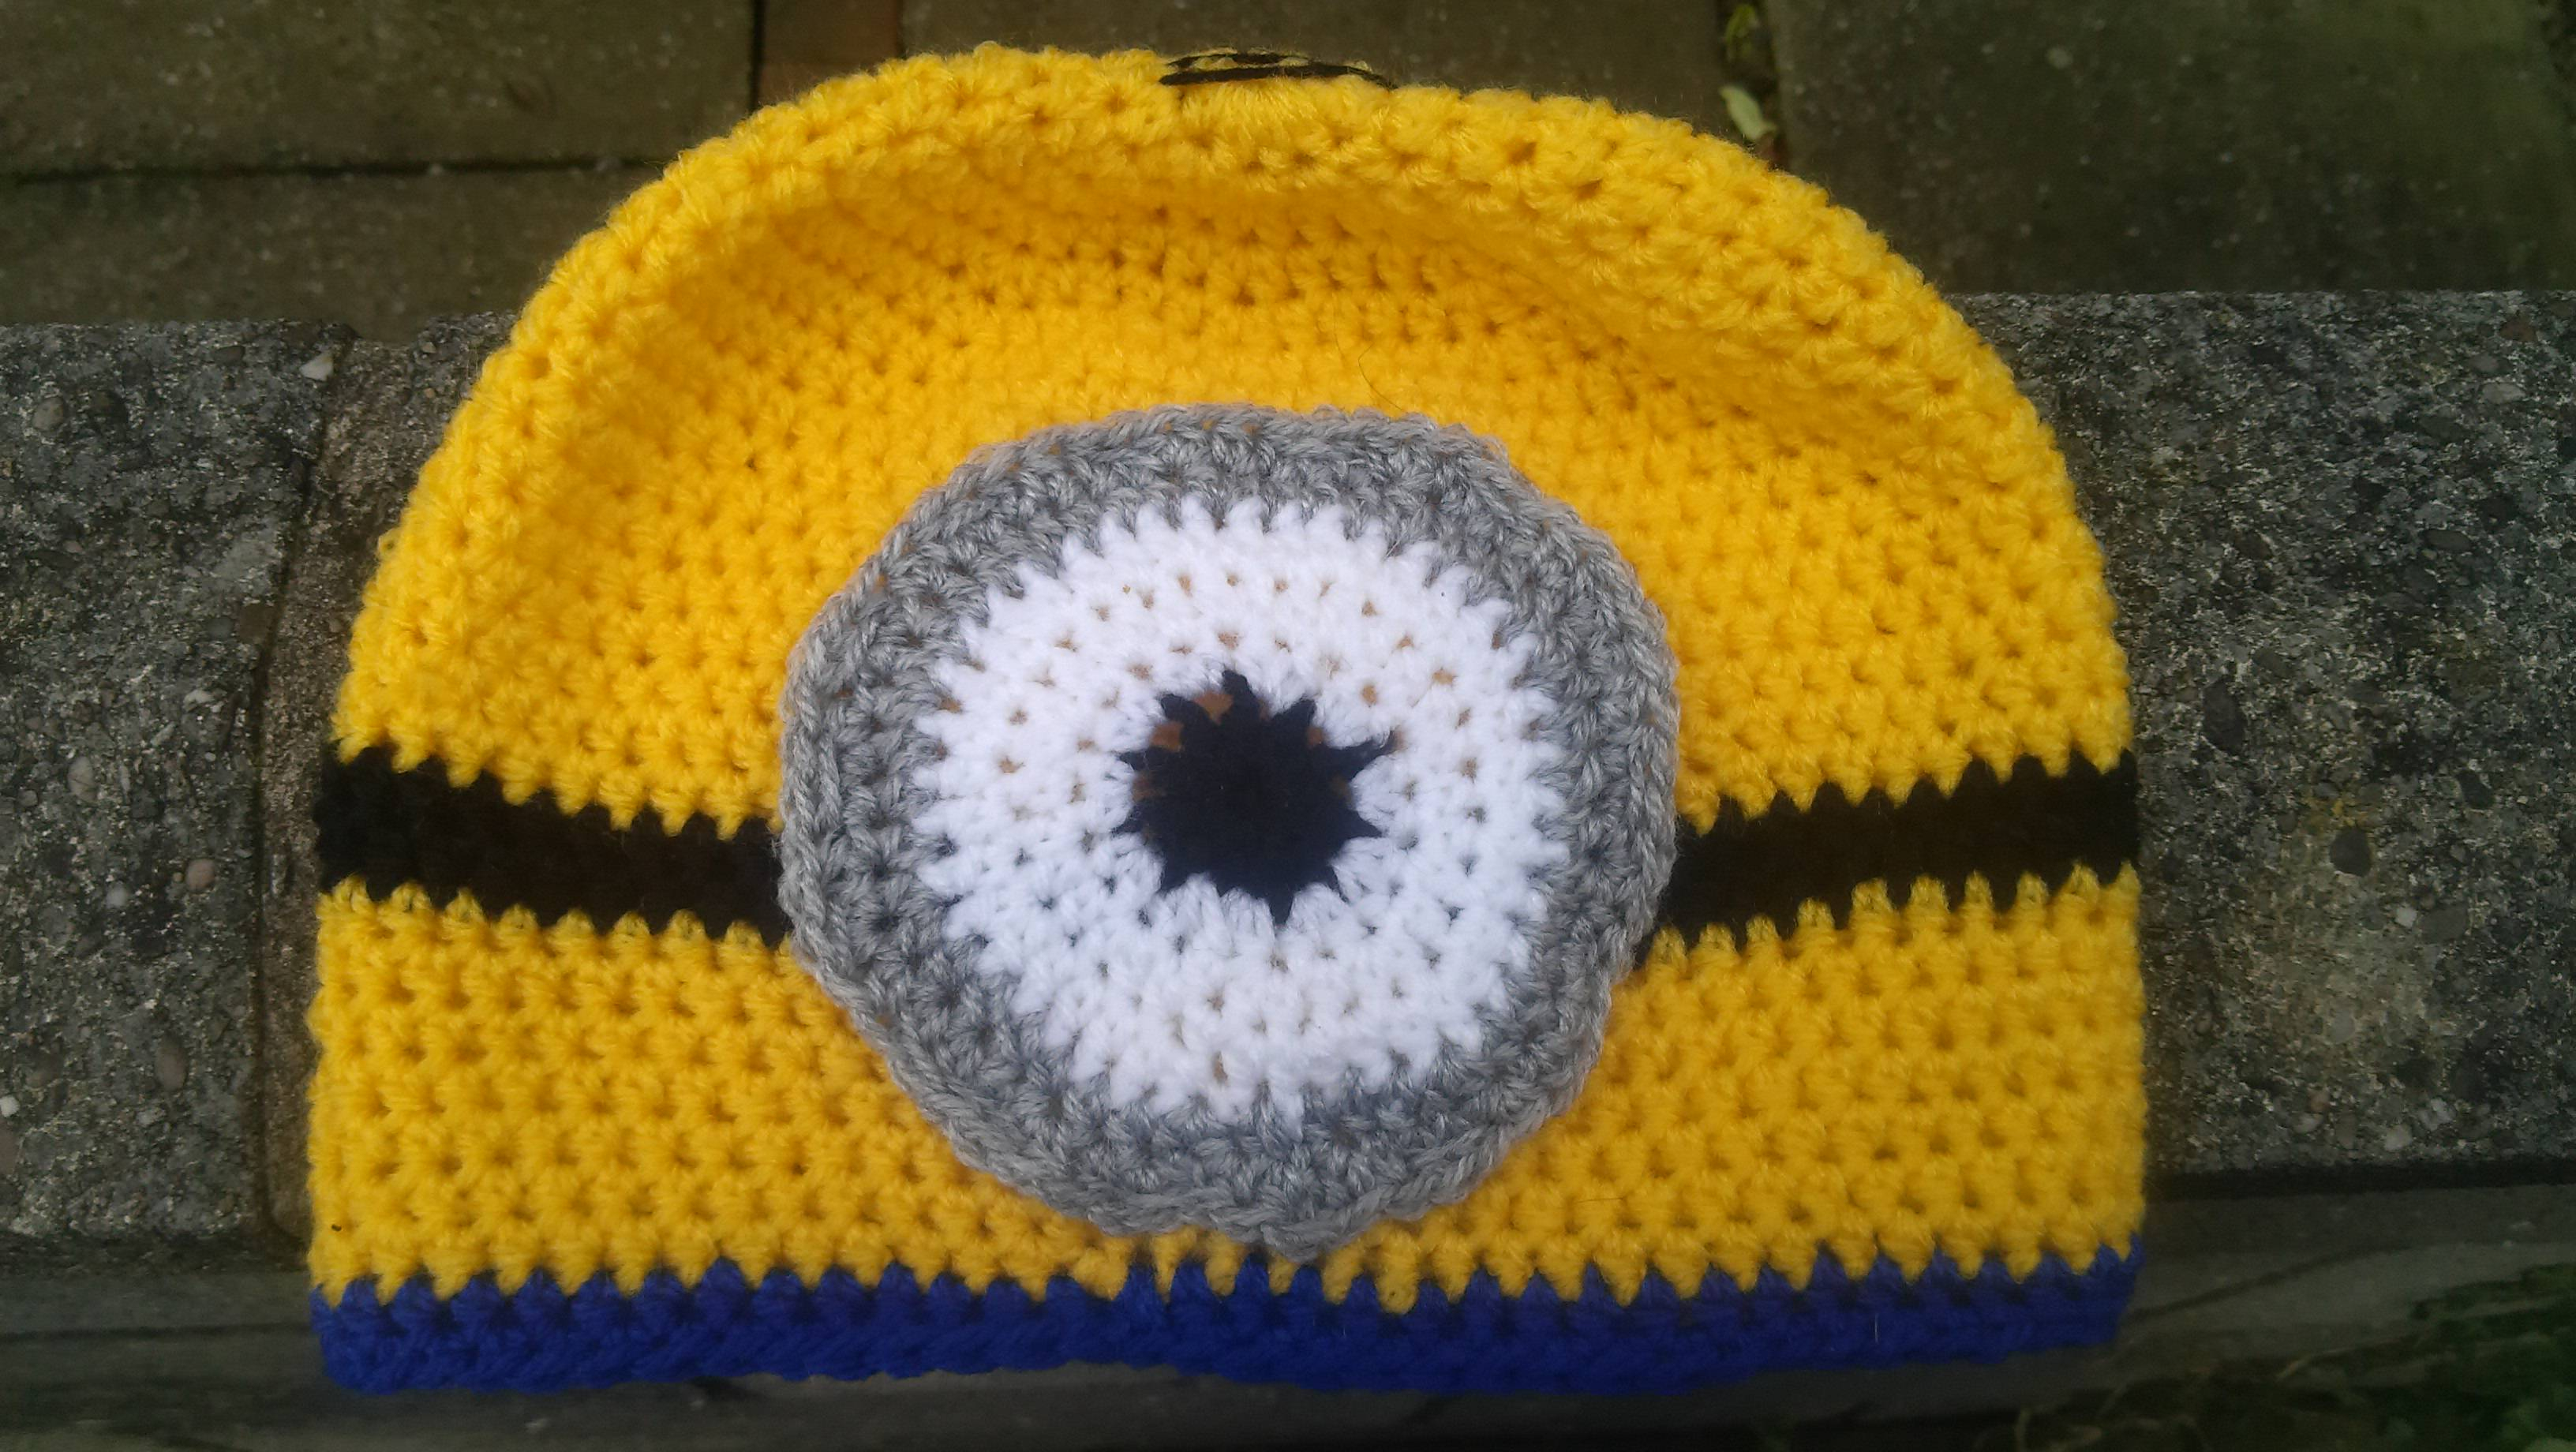 Knitting Patterns For Minions Hat Inspired Minions New Free Tutorial From Ukcrochetpatterns